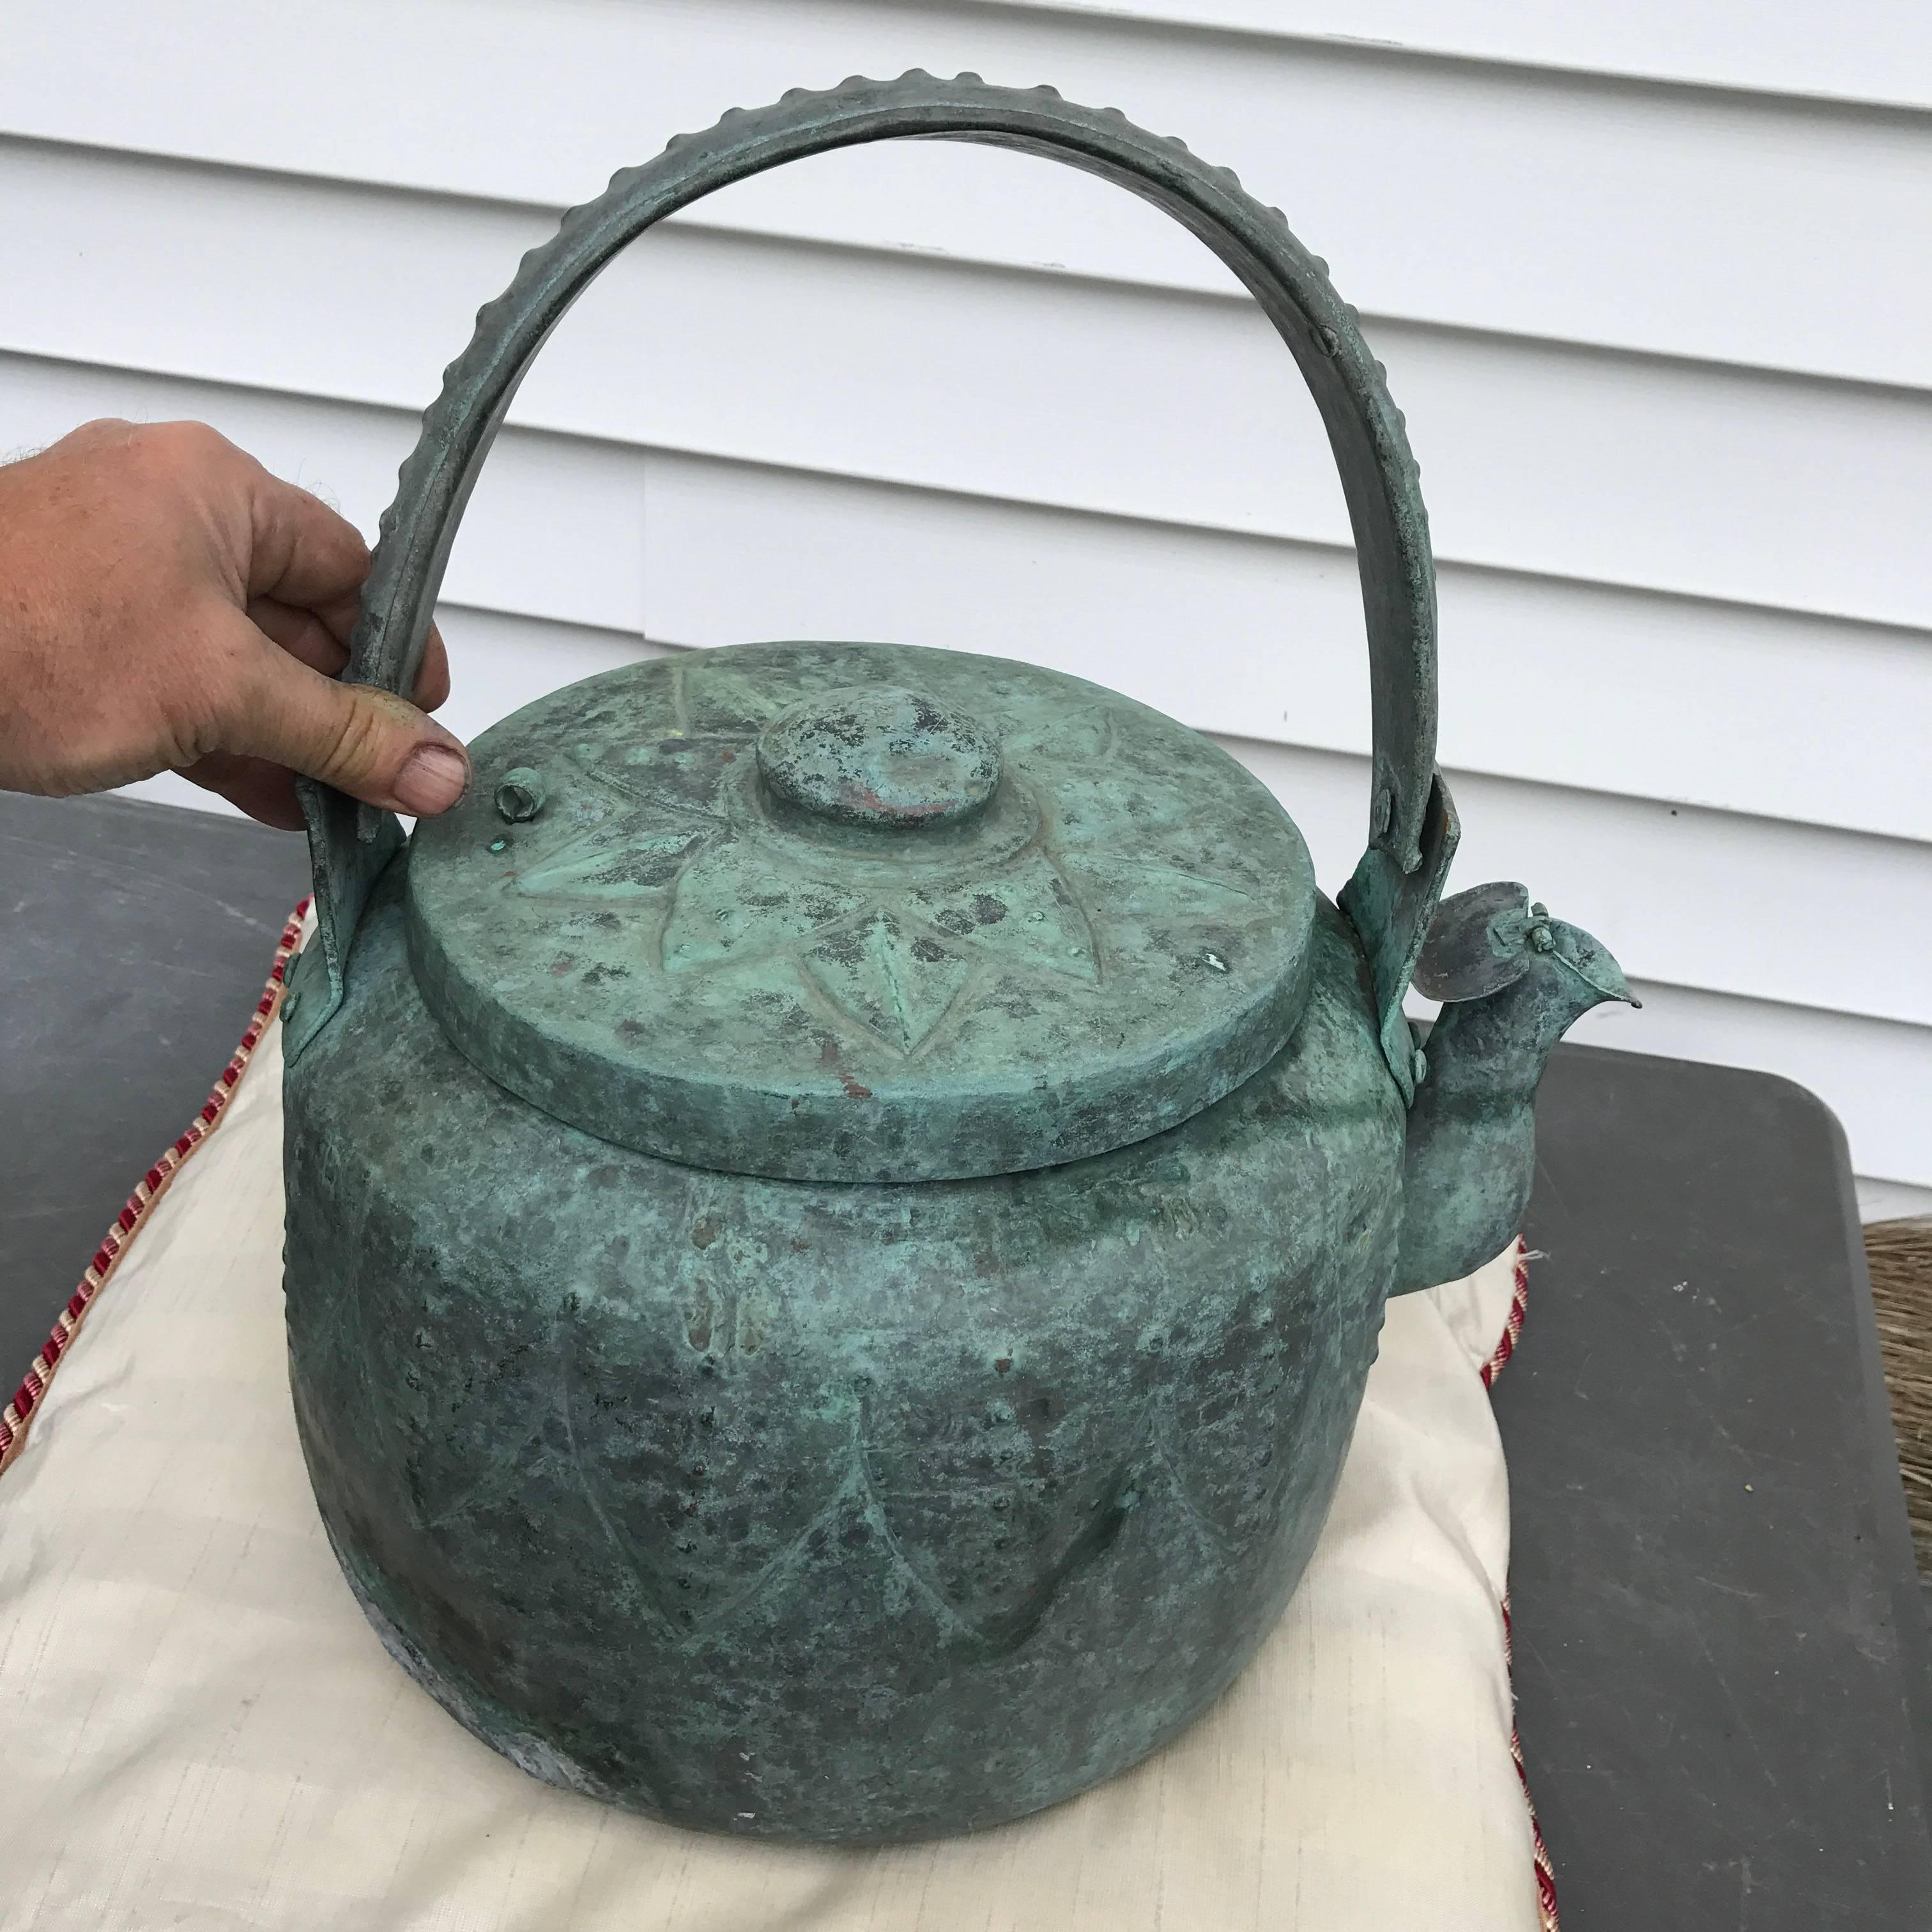 A superb large Japanese large hand-wrought bronze Lotus Leaf pattern Vessel for tea or water yakan possessing a lovely blue green patina. 

Dimensions: Big, 16 inches tall to top of handle and 13 inches wide

Provenance: Old Shigaraki